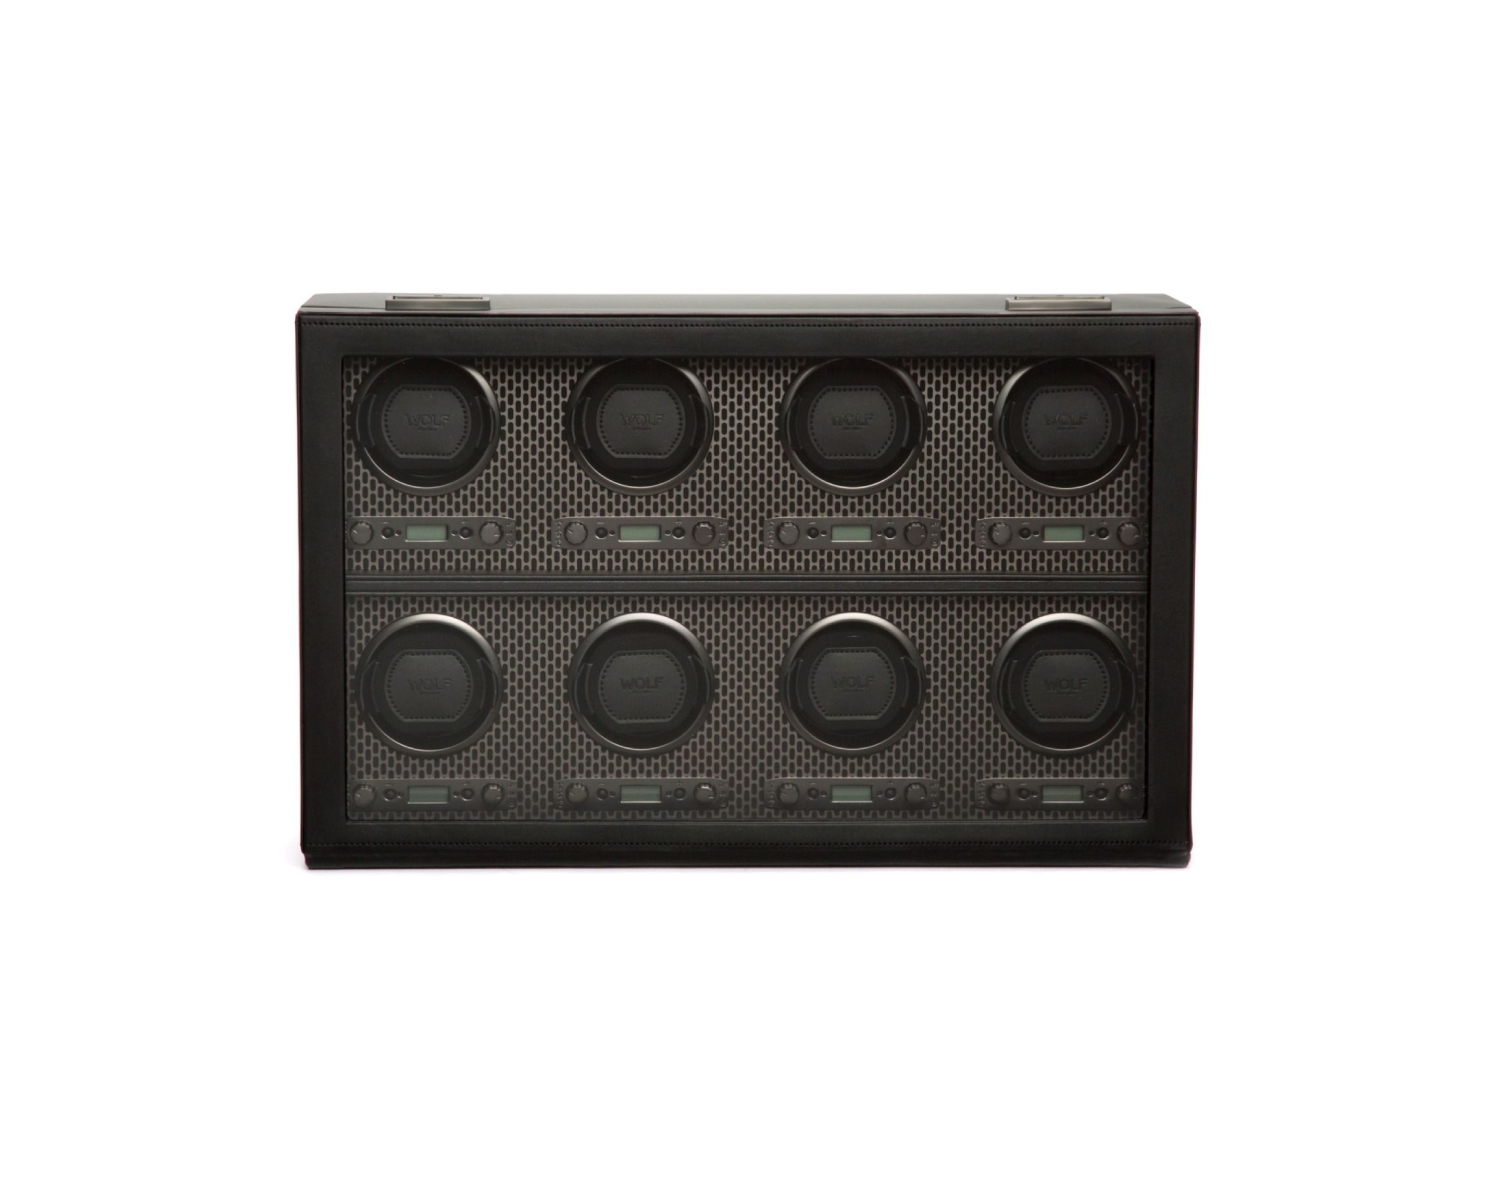 Axis 8pc Watch Winder